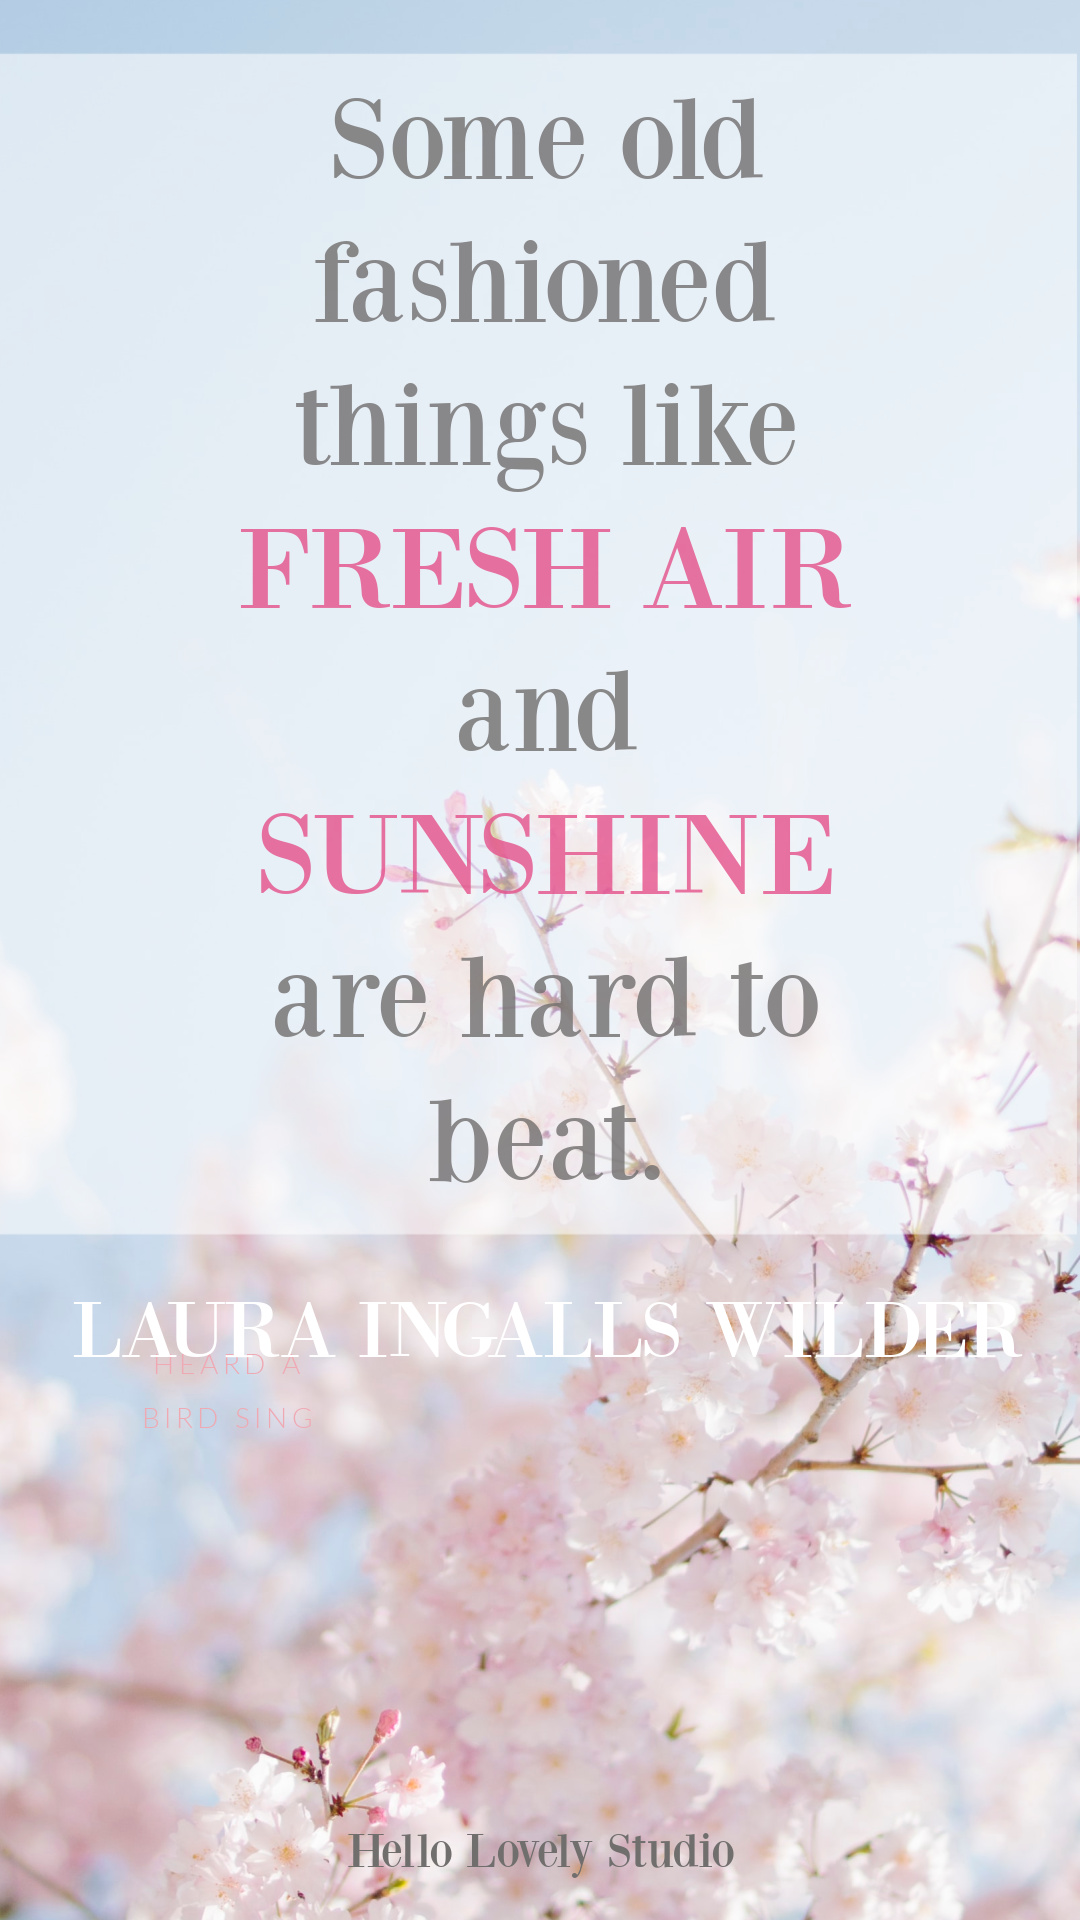 Spring quotes inspirational to welcome hope and encourage wholeness - Hello Lovely Studio. #springquotes #lauraingallswilder